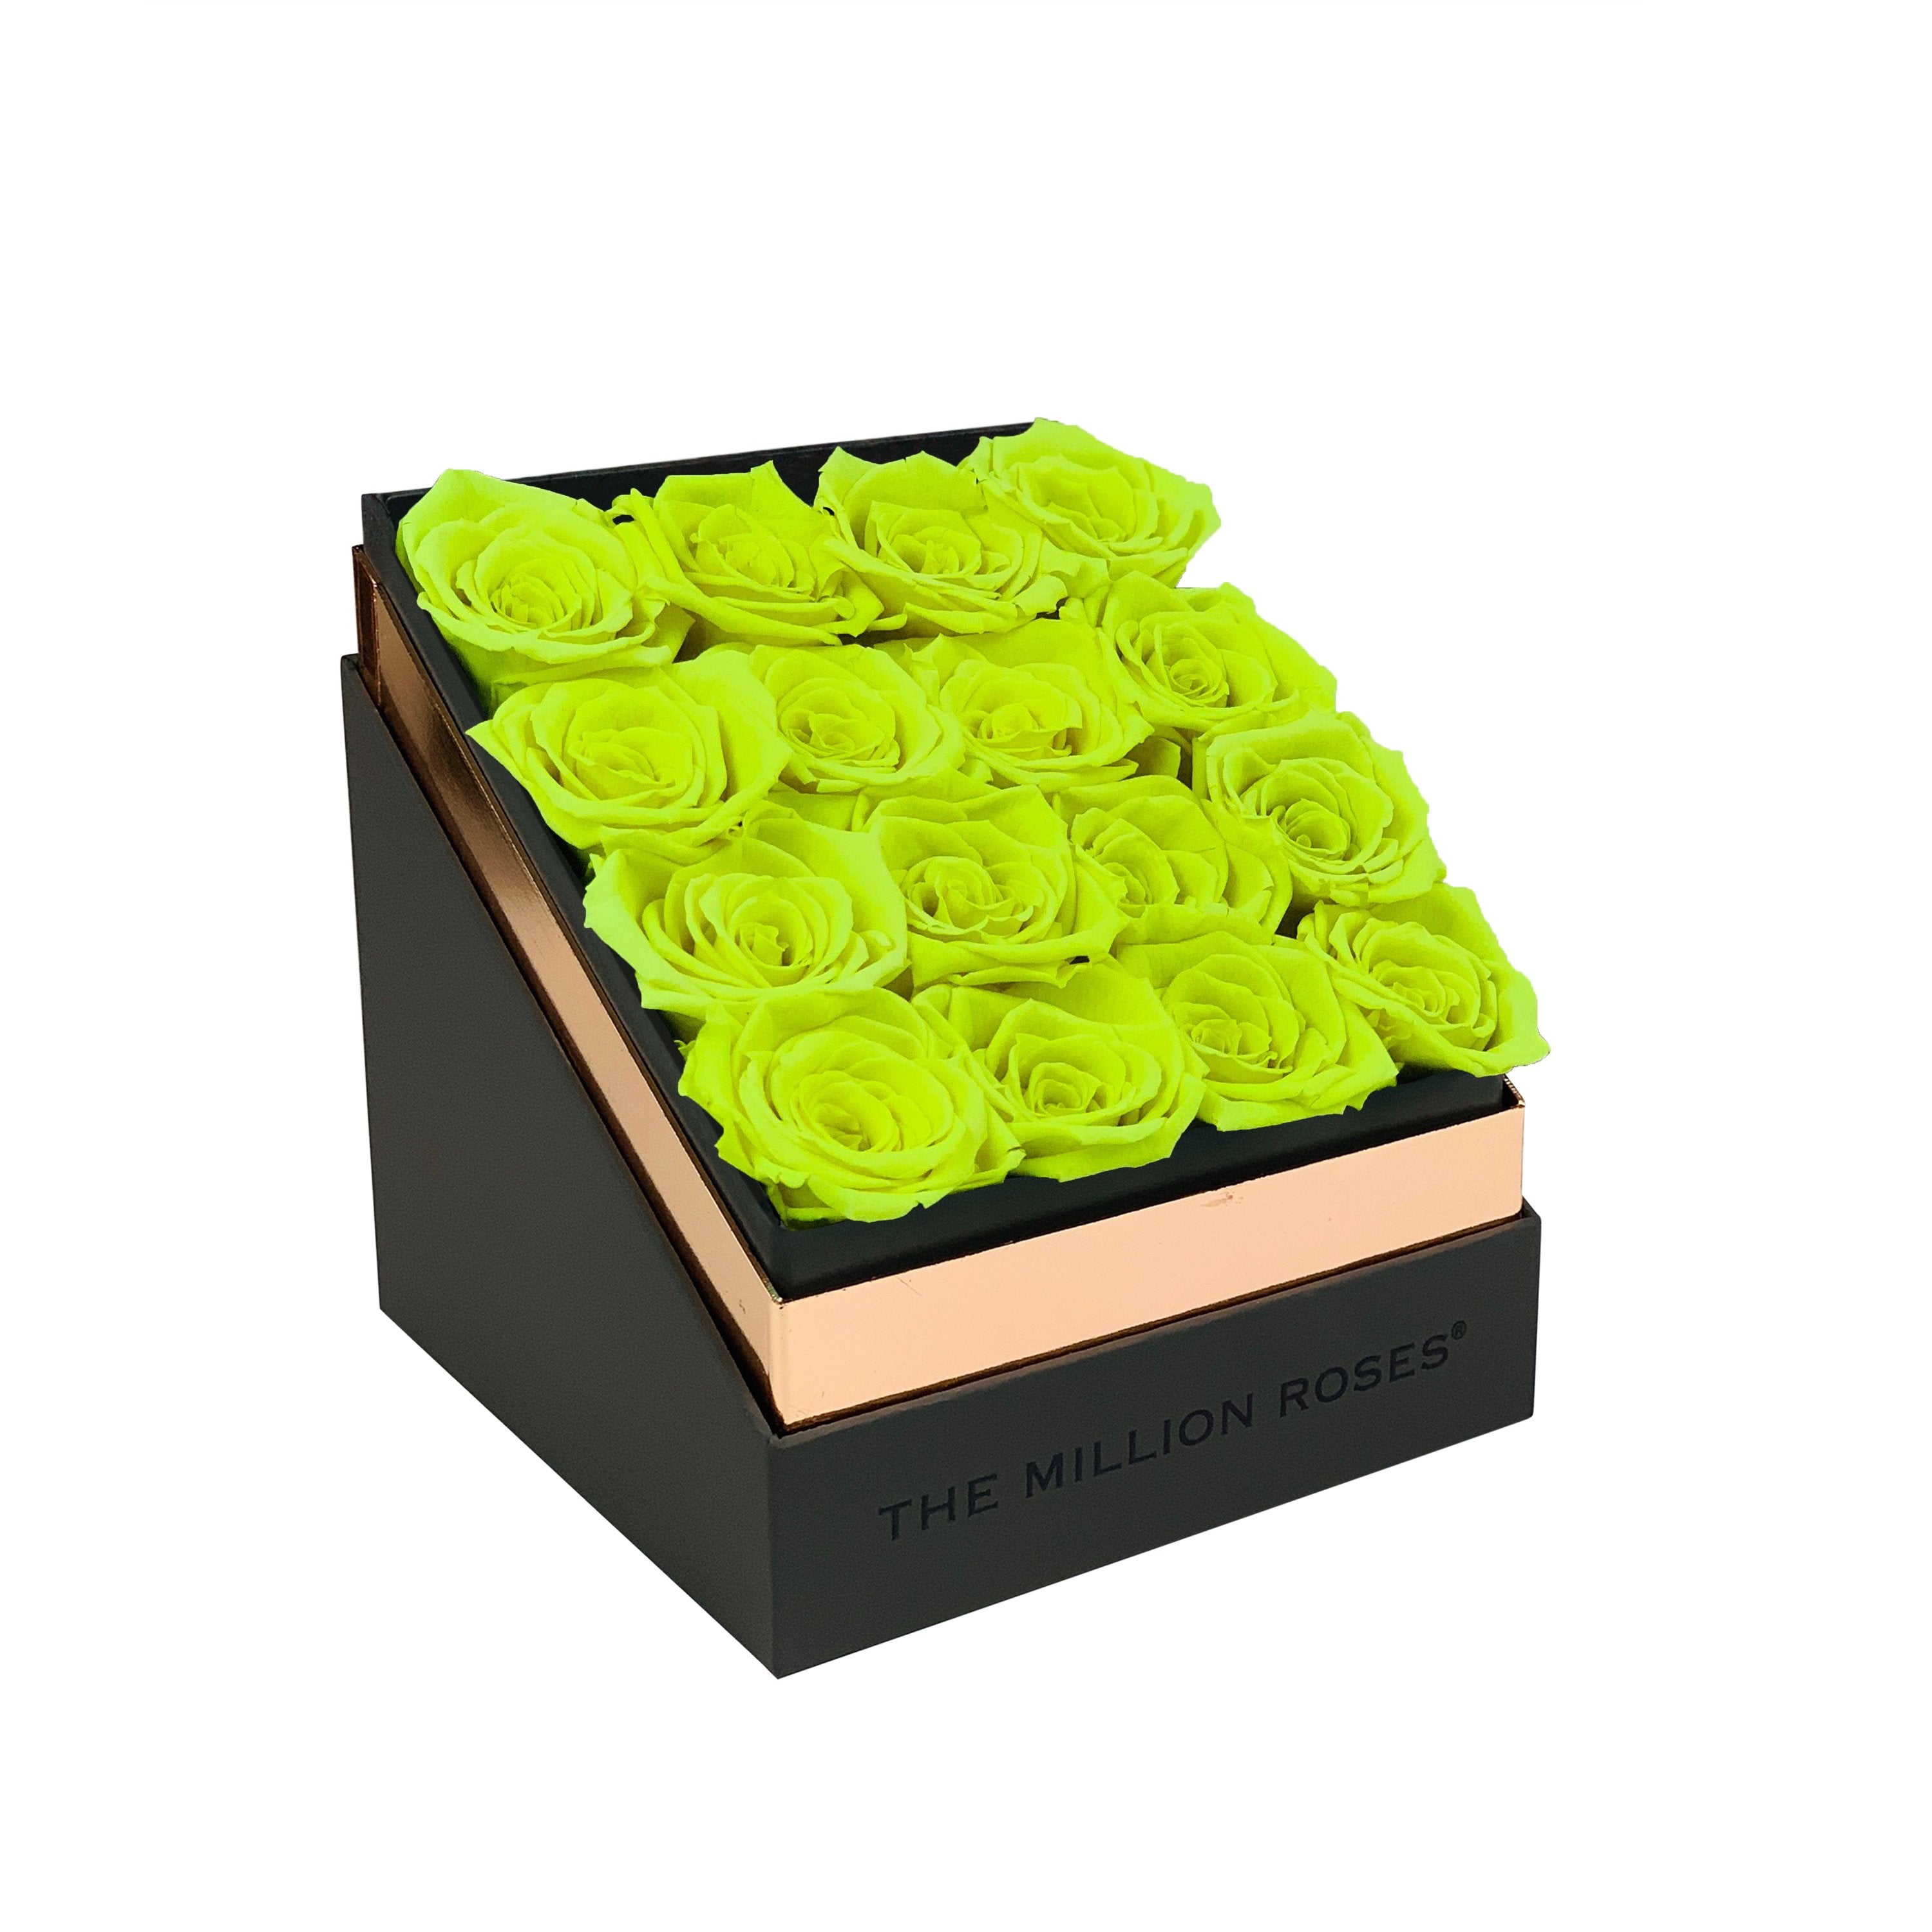 The Square - Gray Box - Neon Green Roses